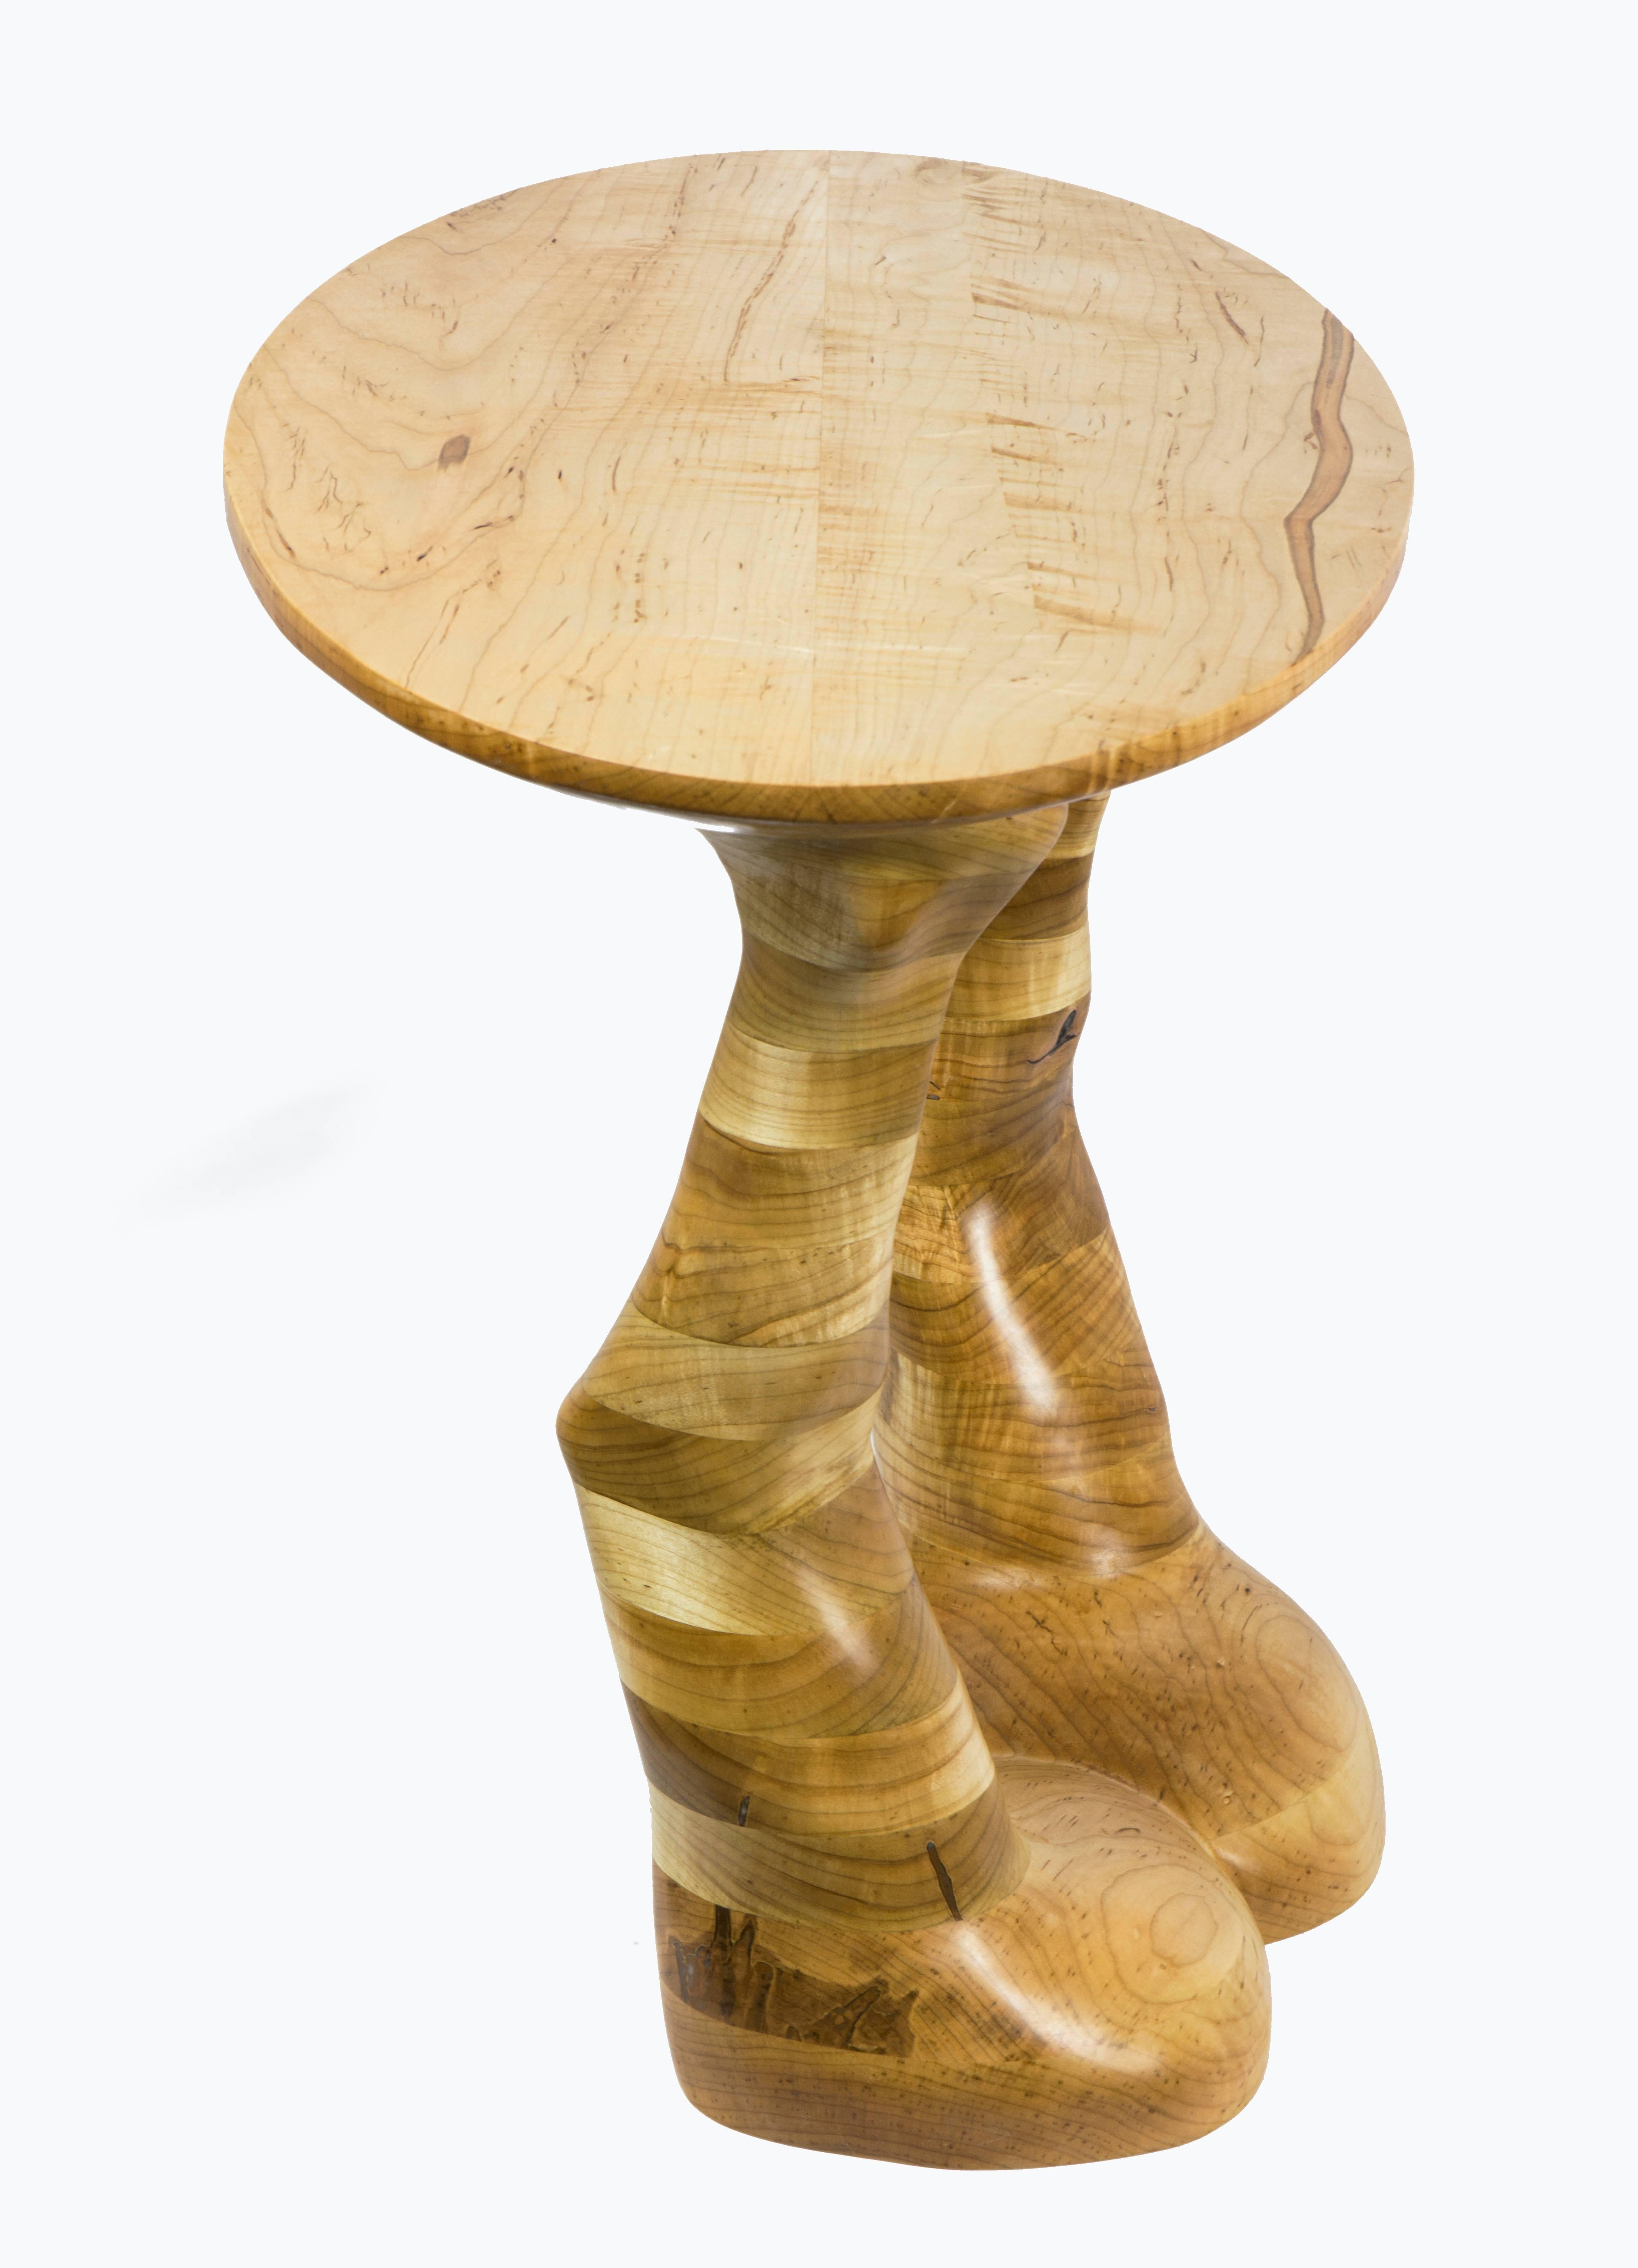 Form #1 hand carved wood sculptural table , ambrosia maple For Sale 3